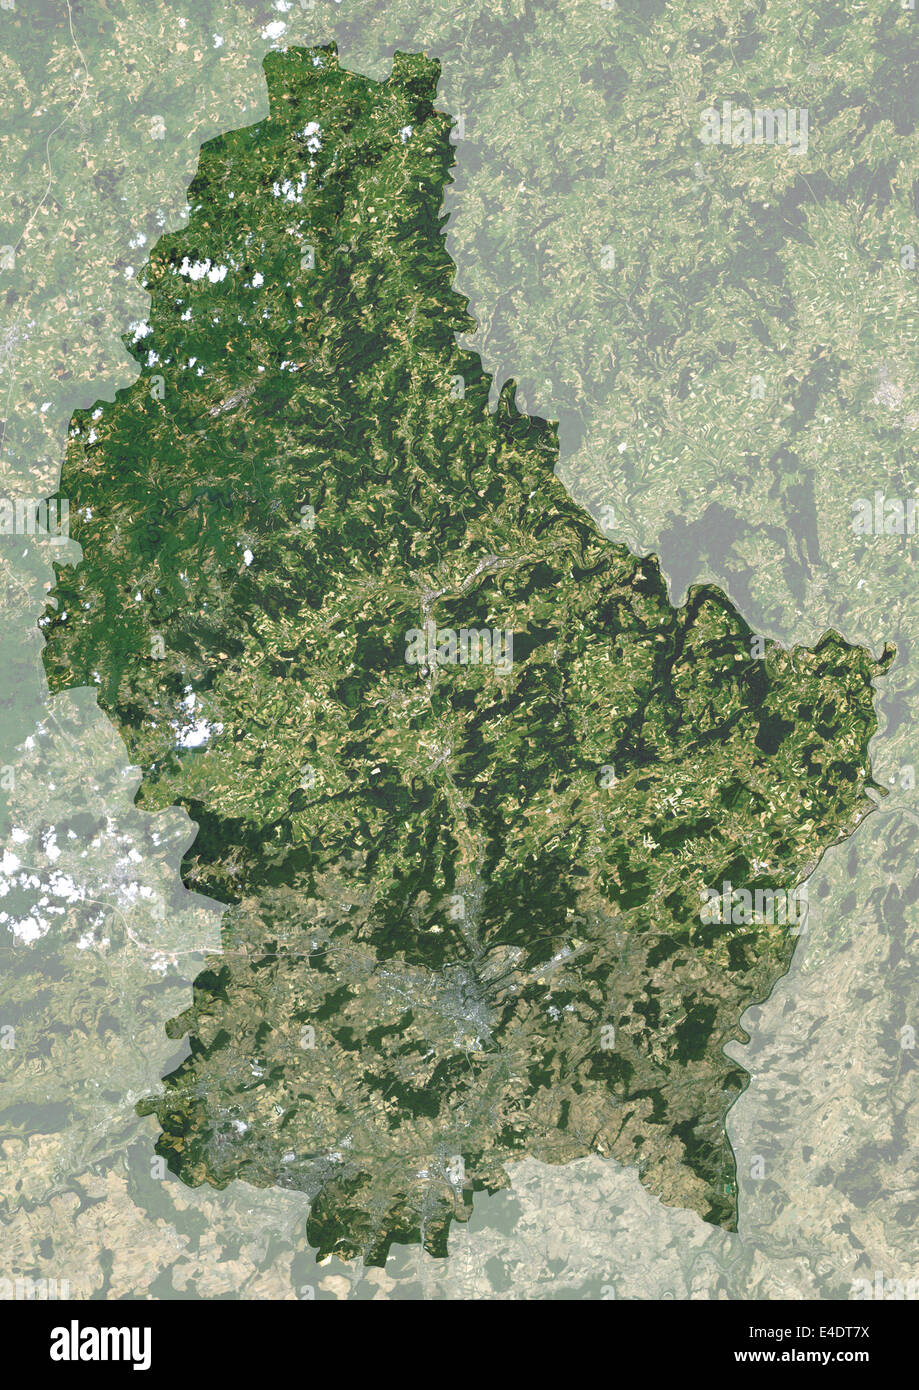 Luxembourg, True Colour Satellite Image With Mask. Luxembourg. True colour satellite image of the Grand Duchy of Luxembourg (wit Stock Photo